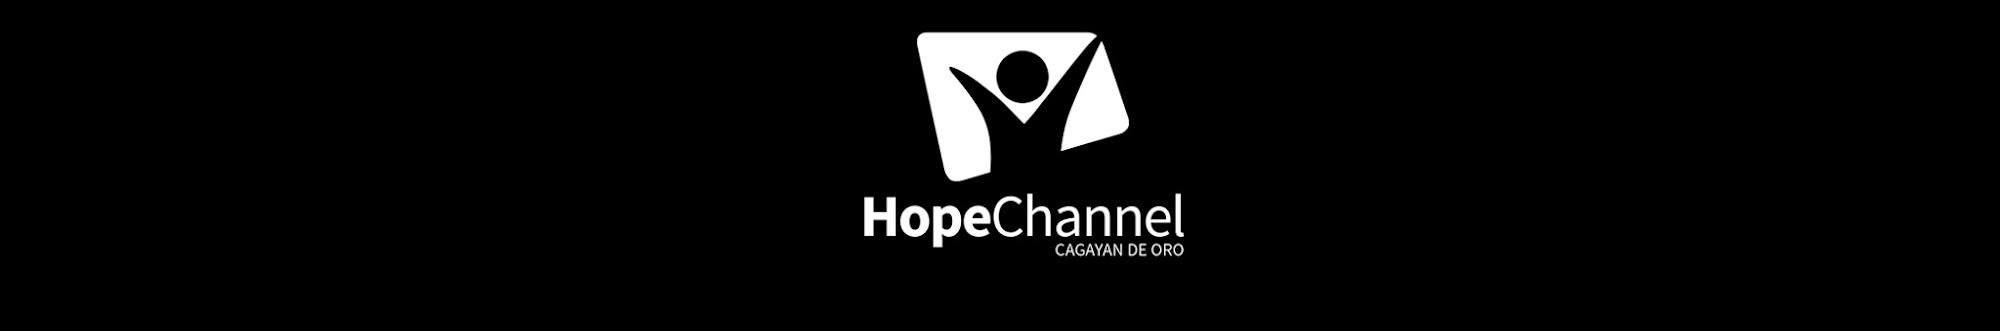 Hope Channel South Philippines